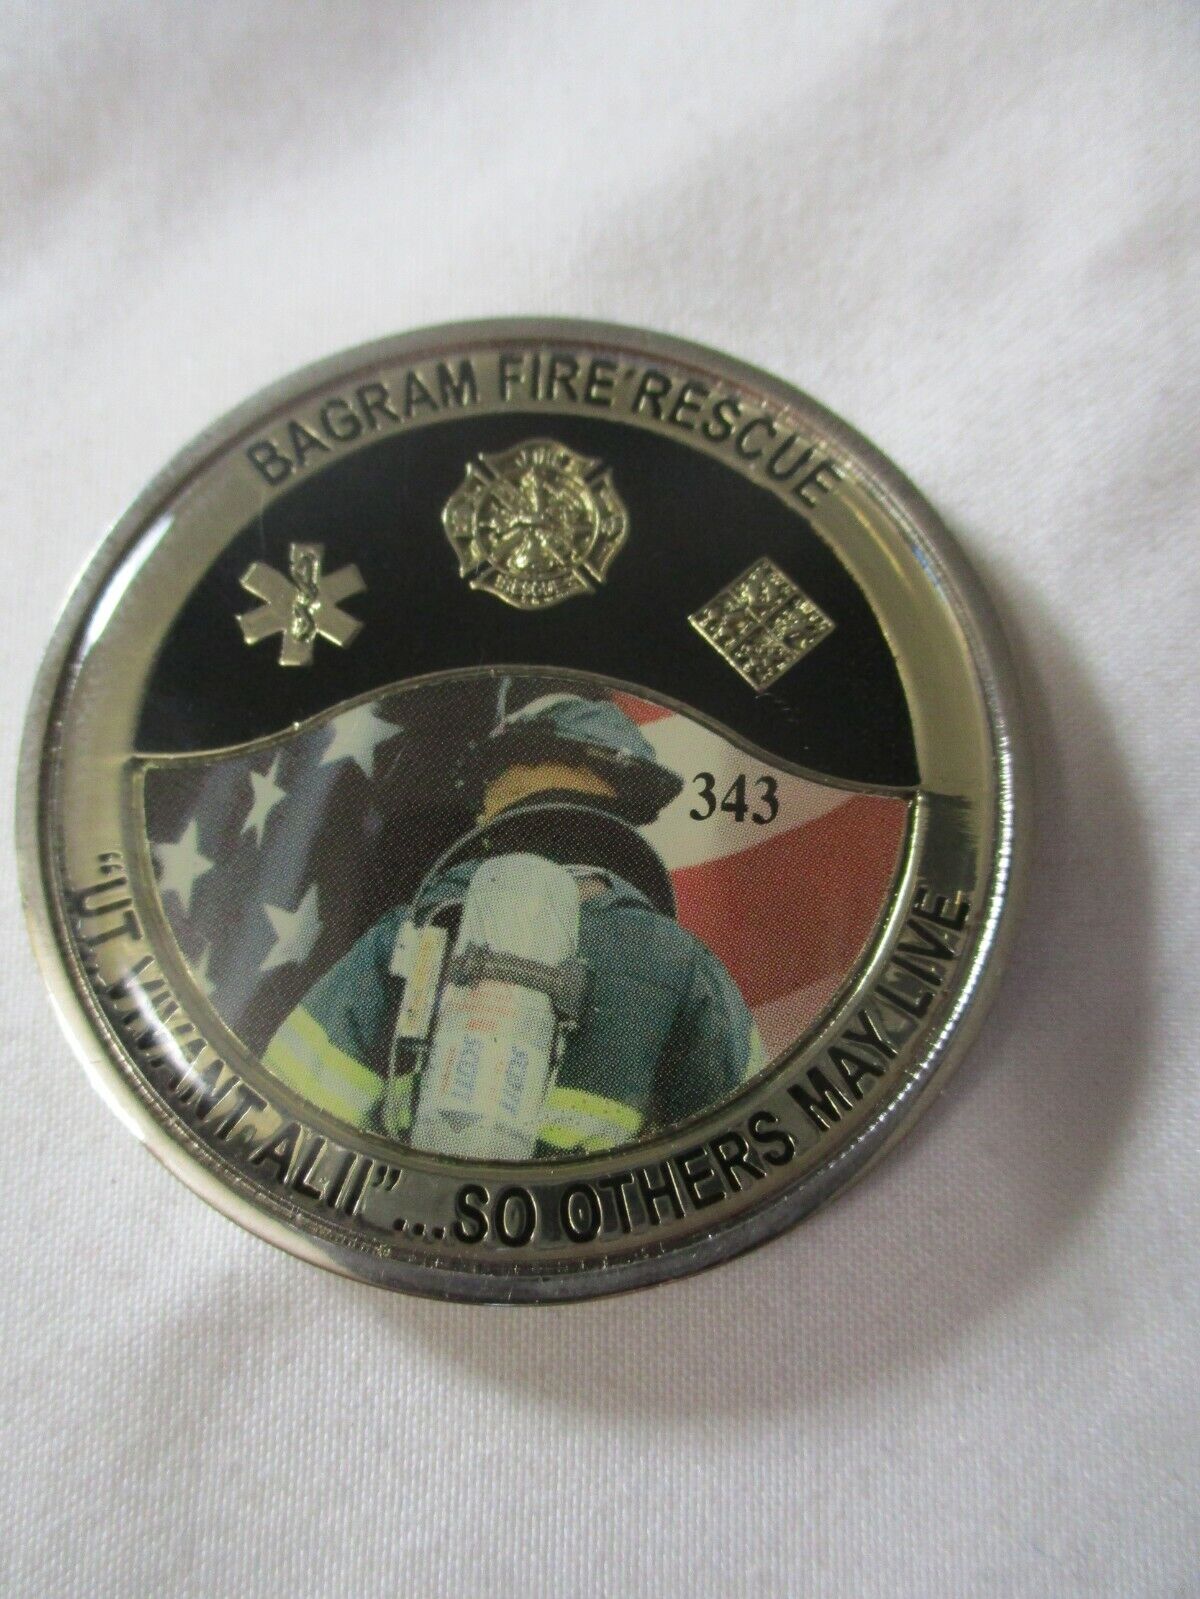 Bagram Fire Rescue 343 Afghanistan Operation Enduring Freedom OEF Challenge Coin